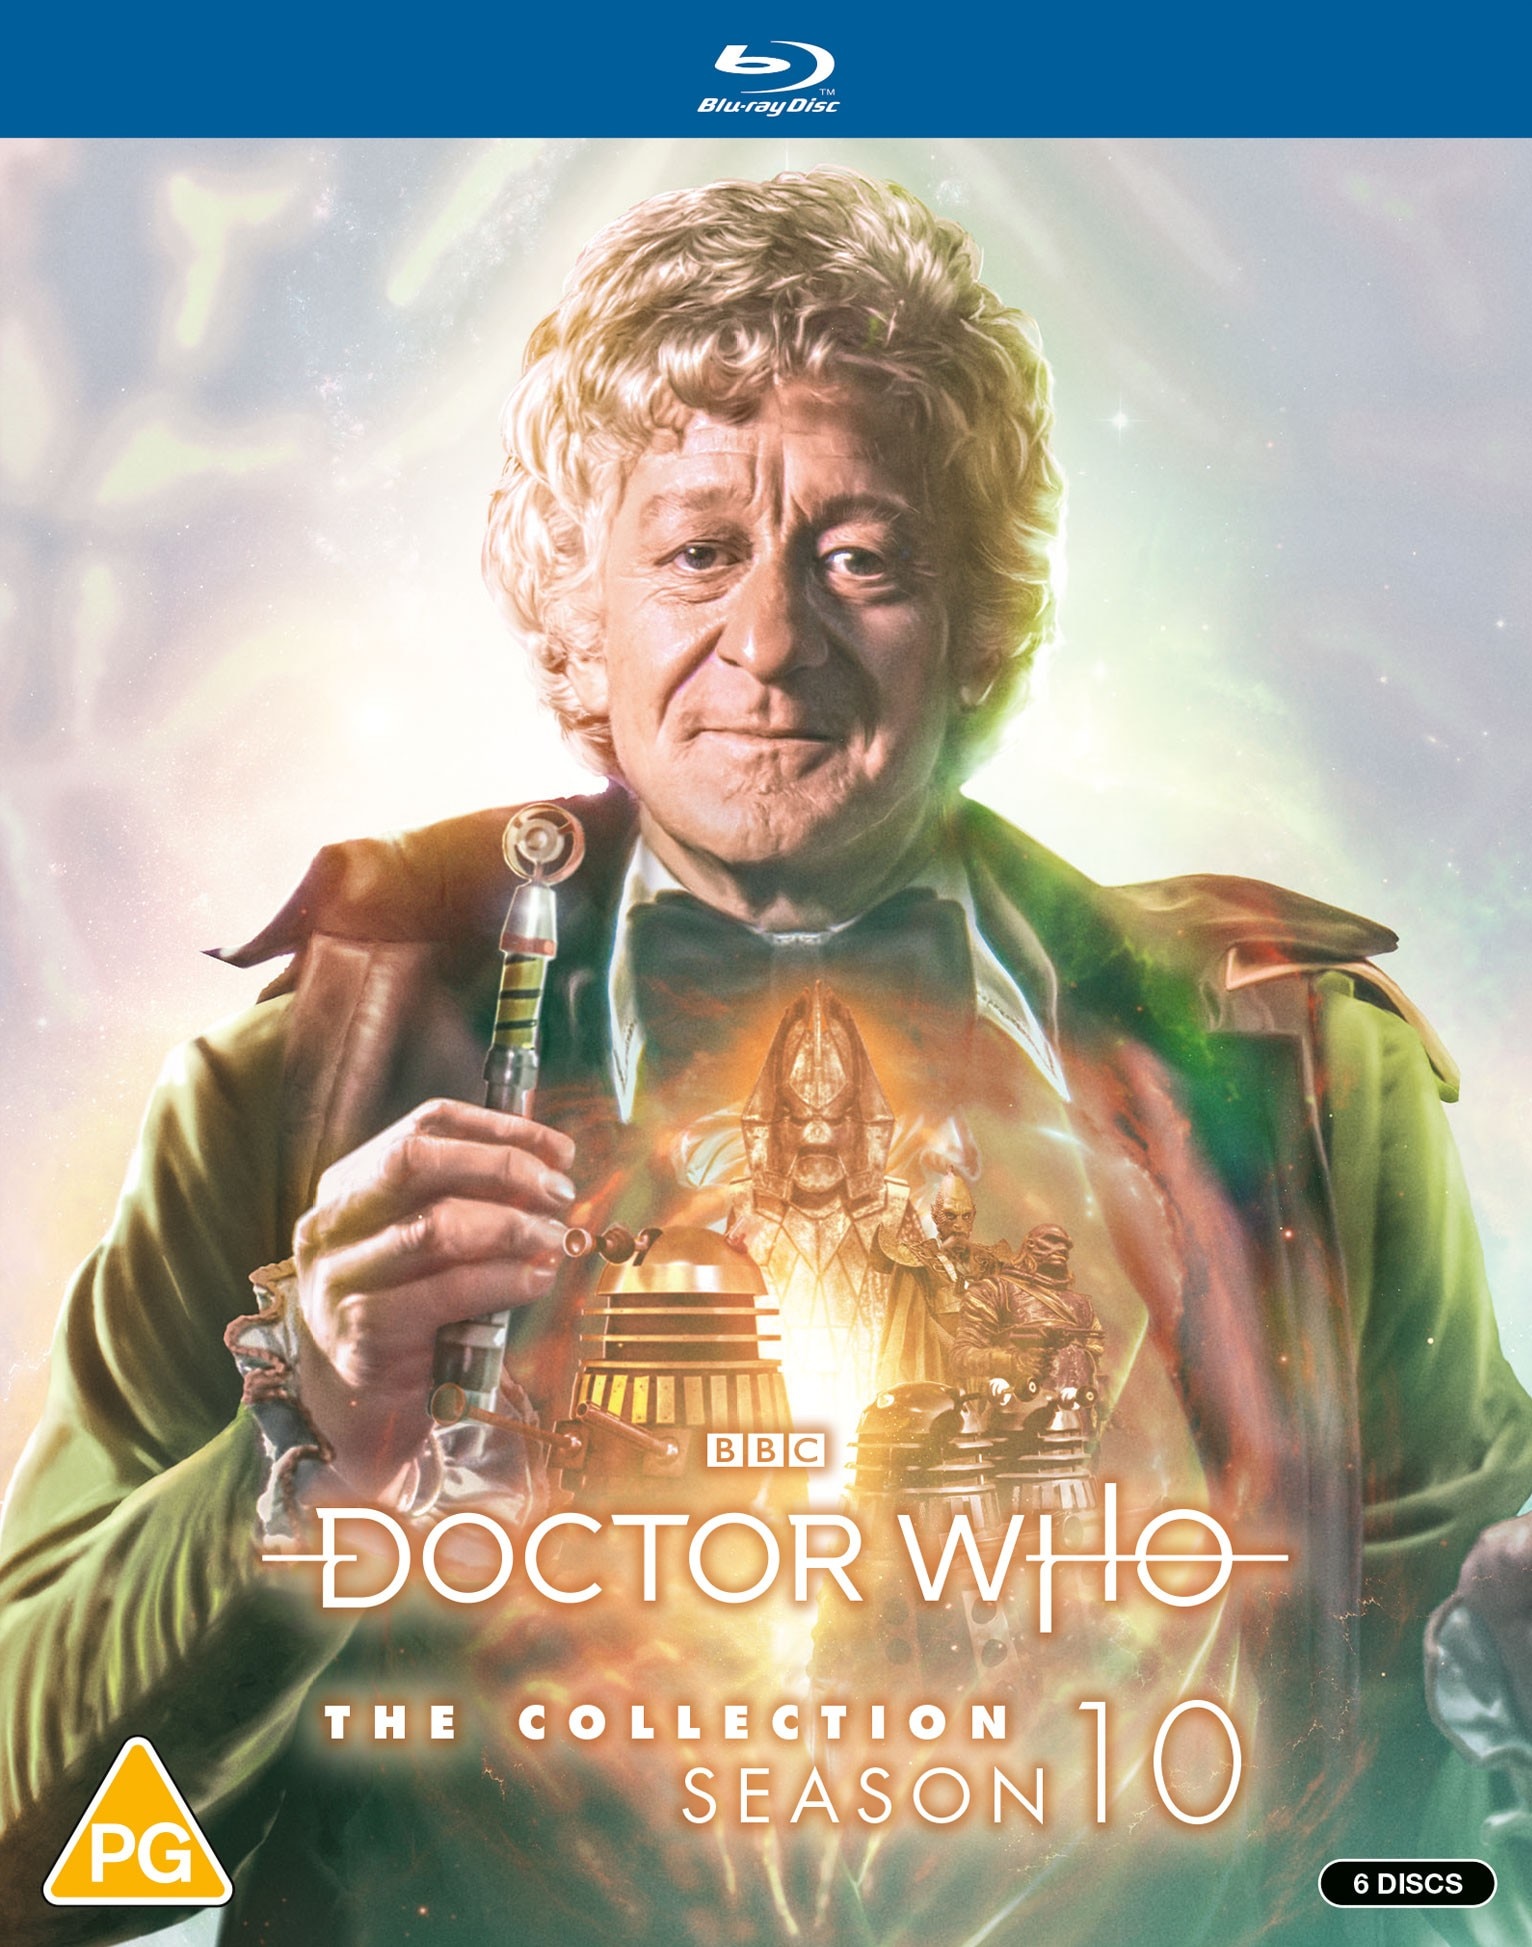 Season 10 and 18 will be reissued in The Collection Bluray standard packaging Doctor Who